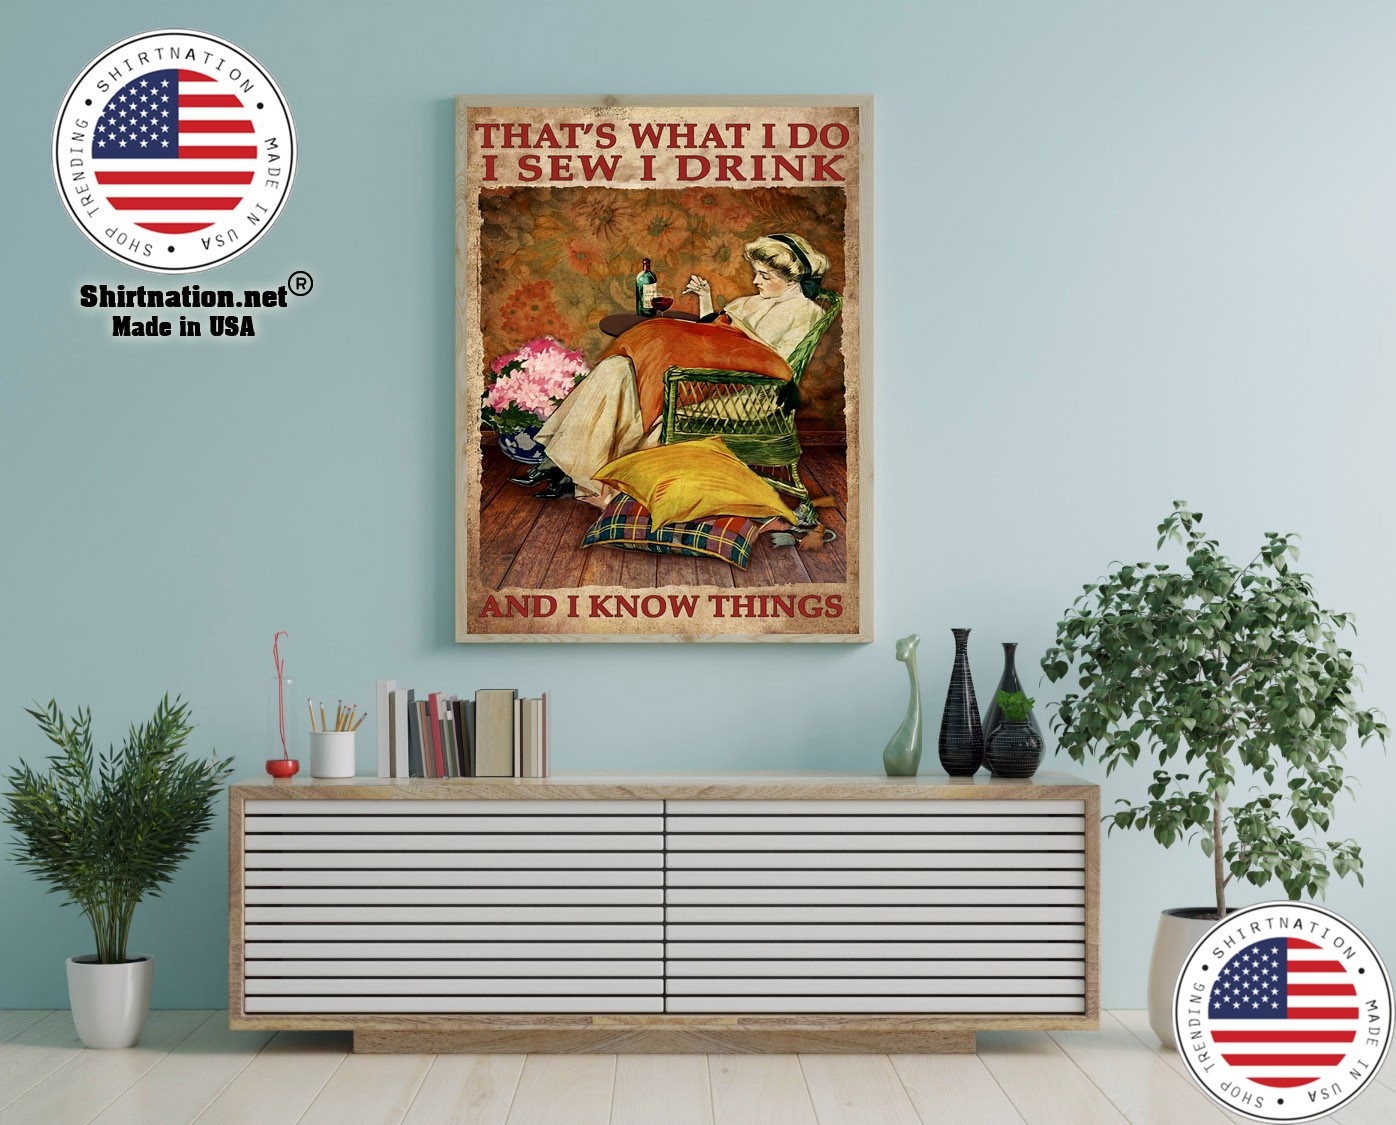 Thats what I do I sew I drink and I know things poster 12 1